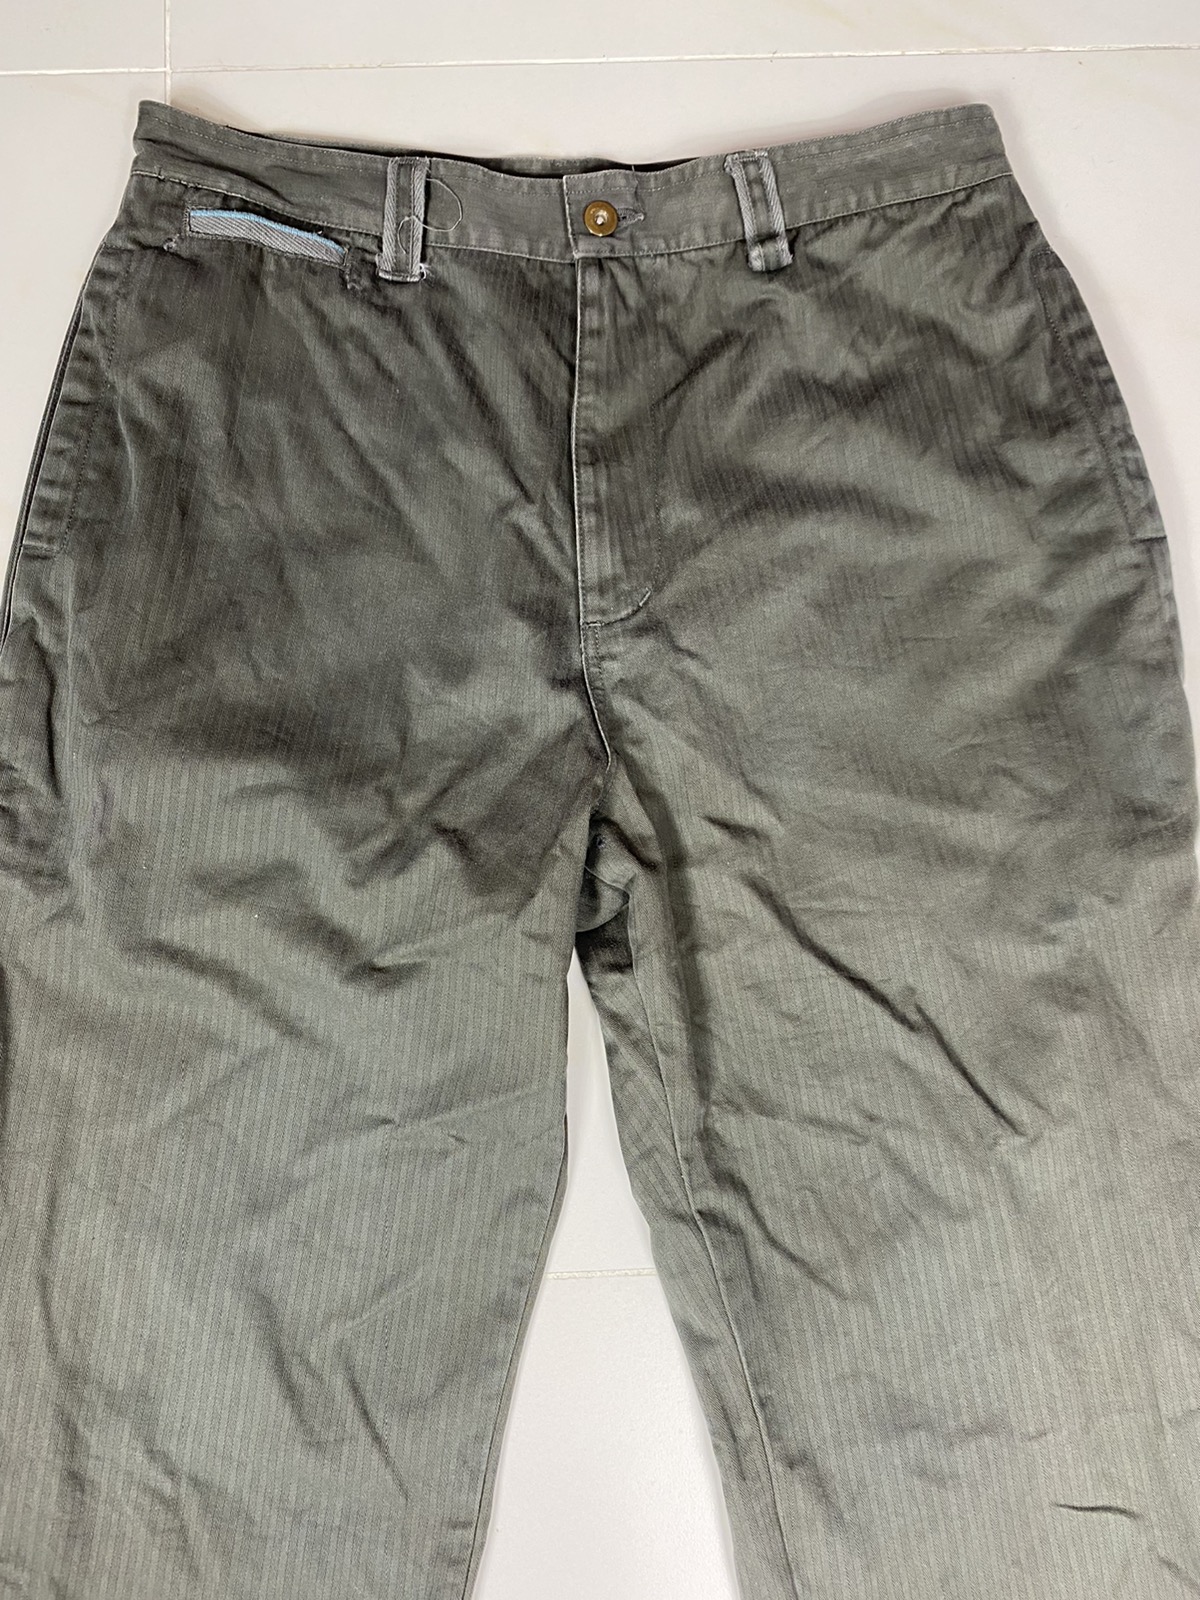 Japanese Brand - Mad Hectic Trousers Pants. S0150 - 3